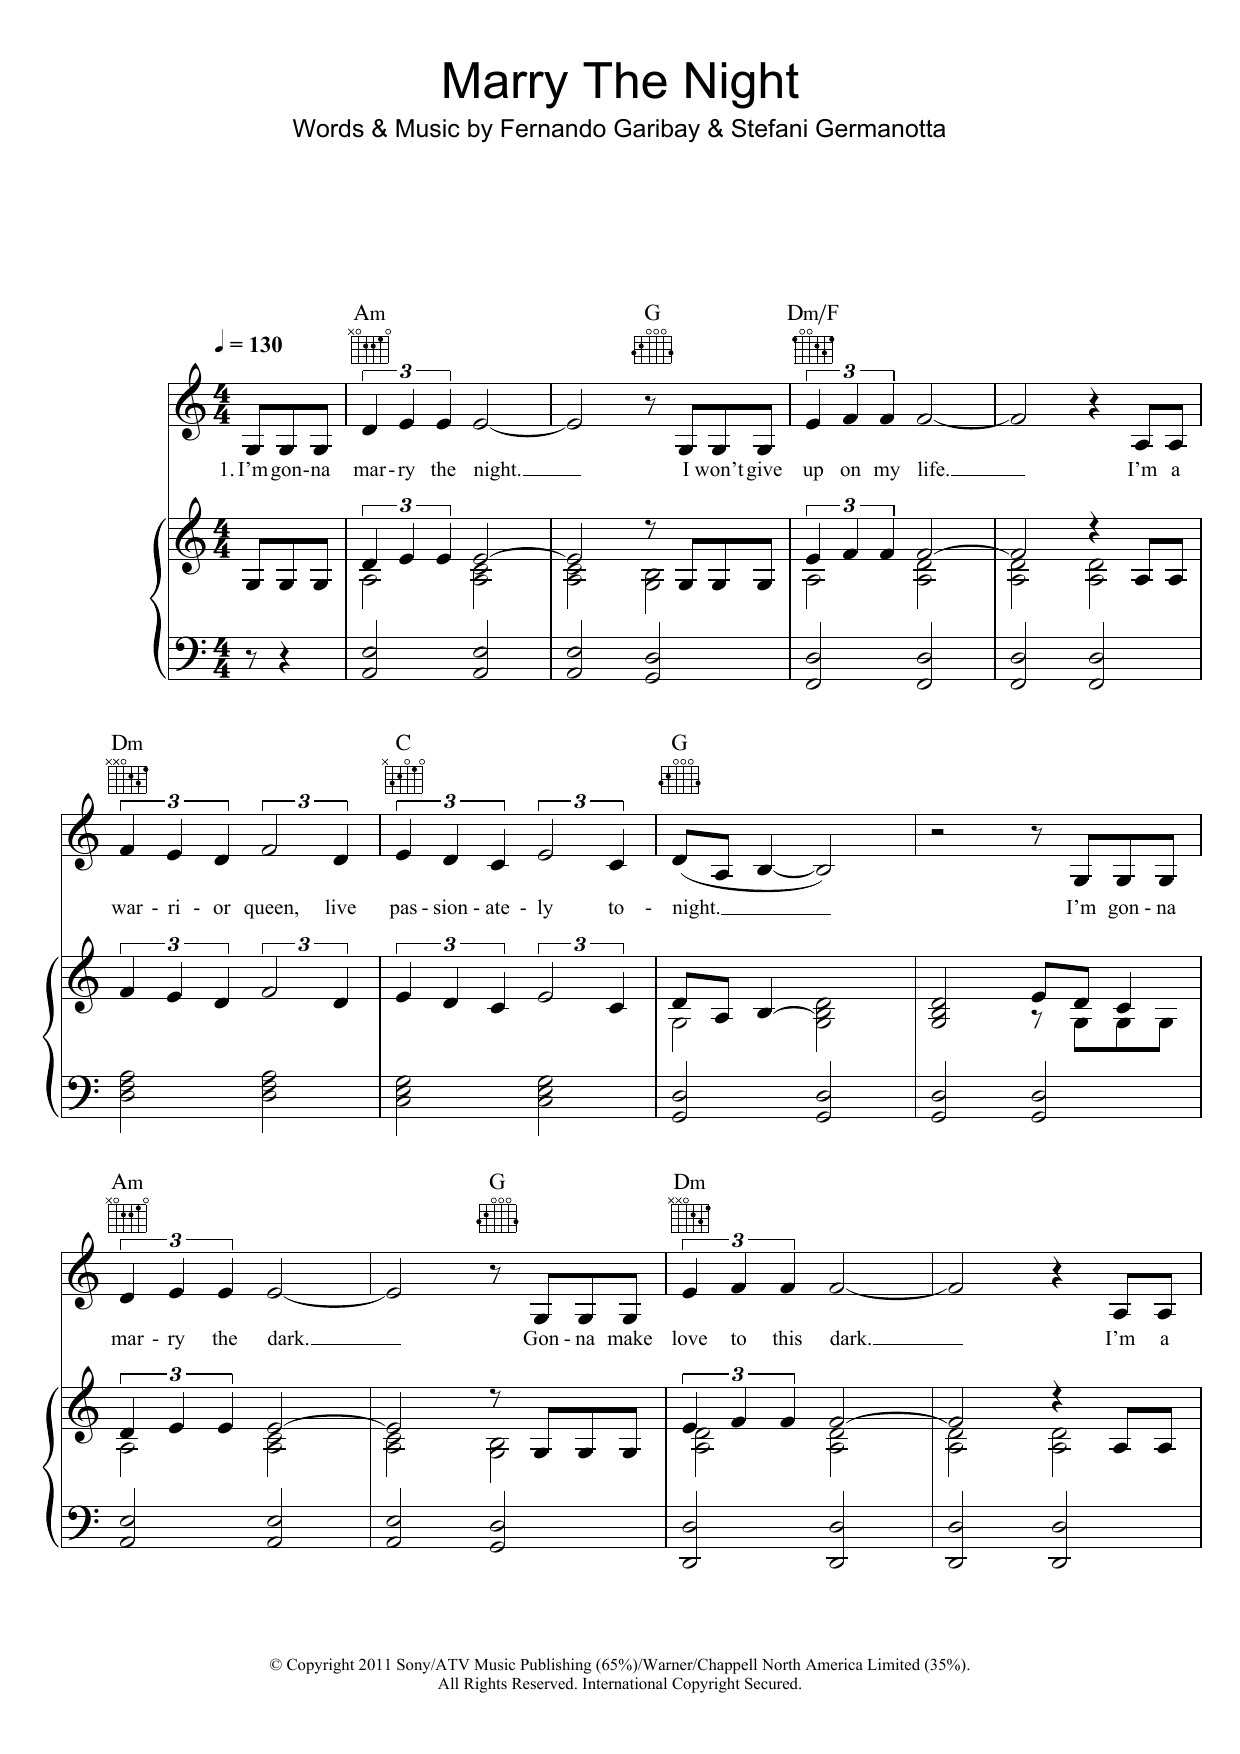 Download Lady Gaga Marry The Night Sheet Music